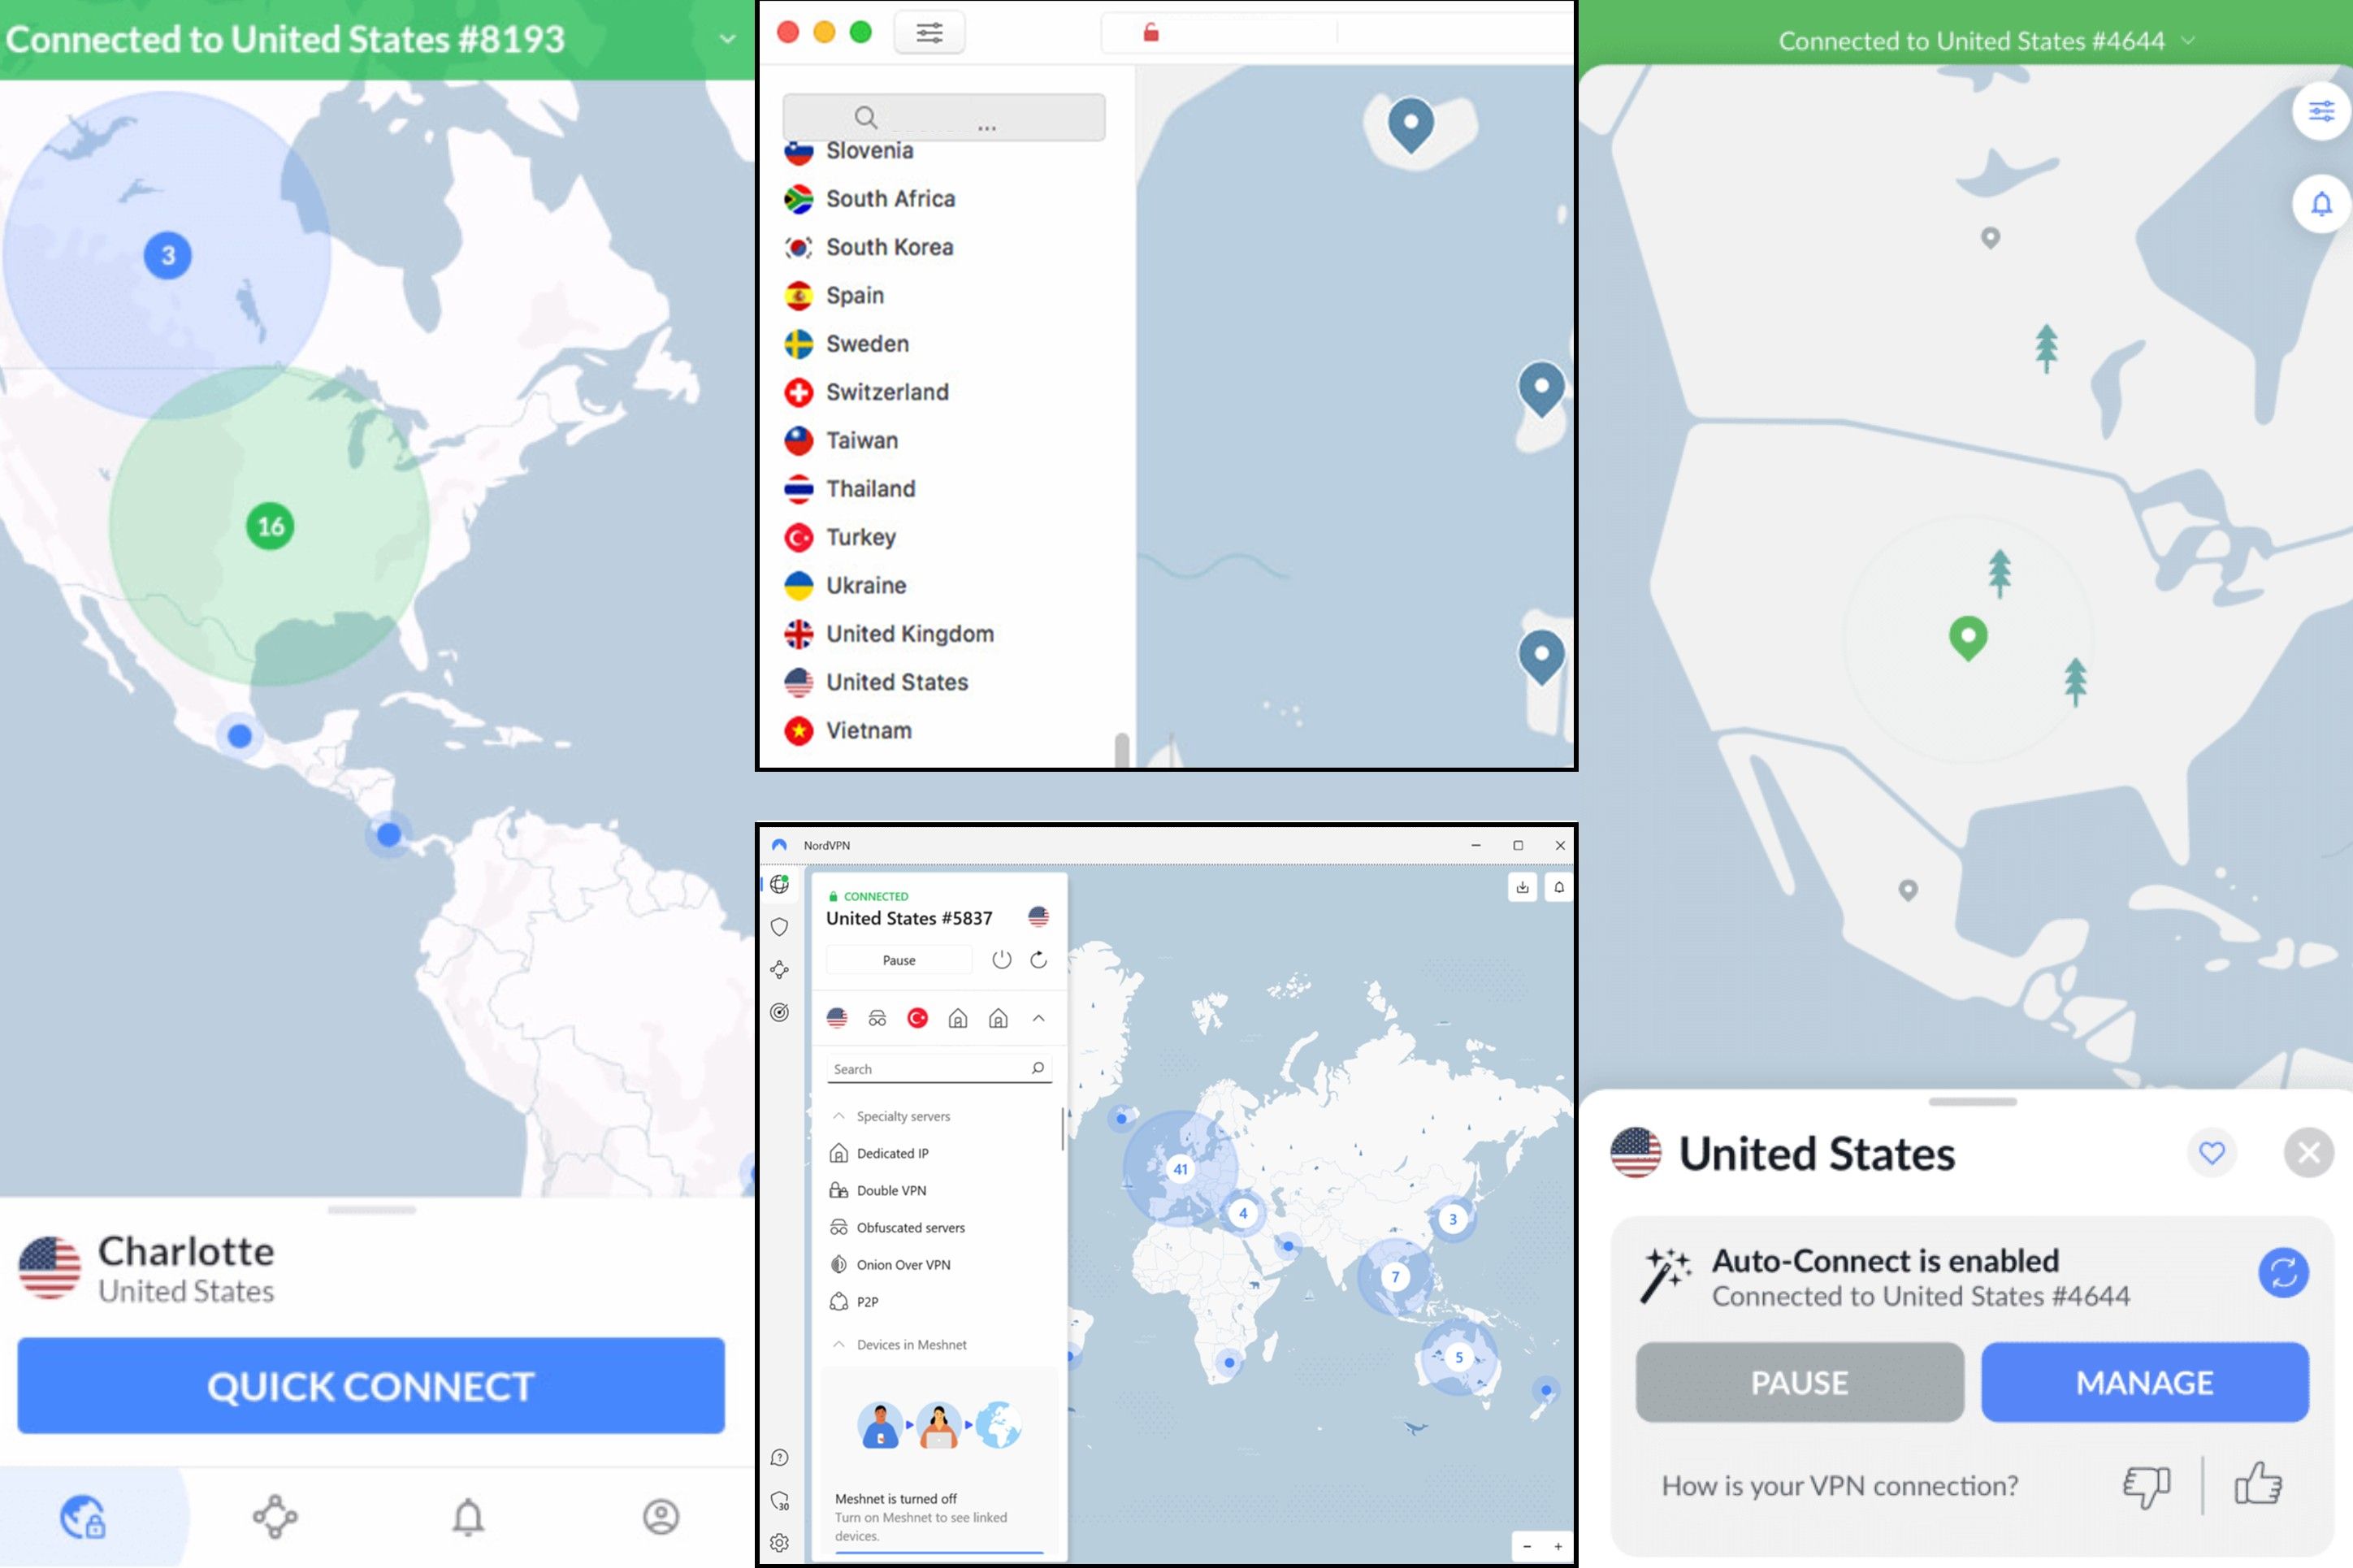 NordVPN interfaces on Android, Mac, Windows, and iOS